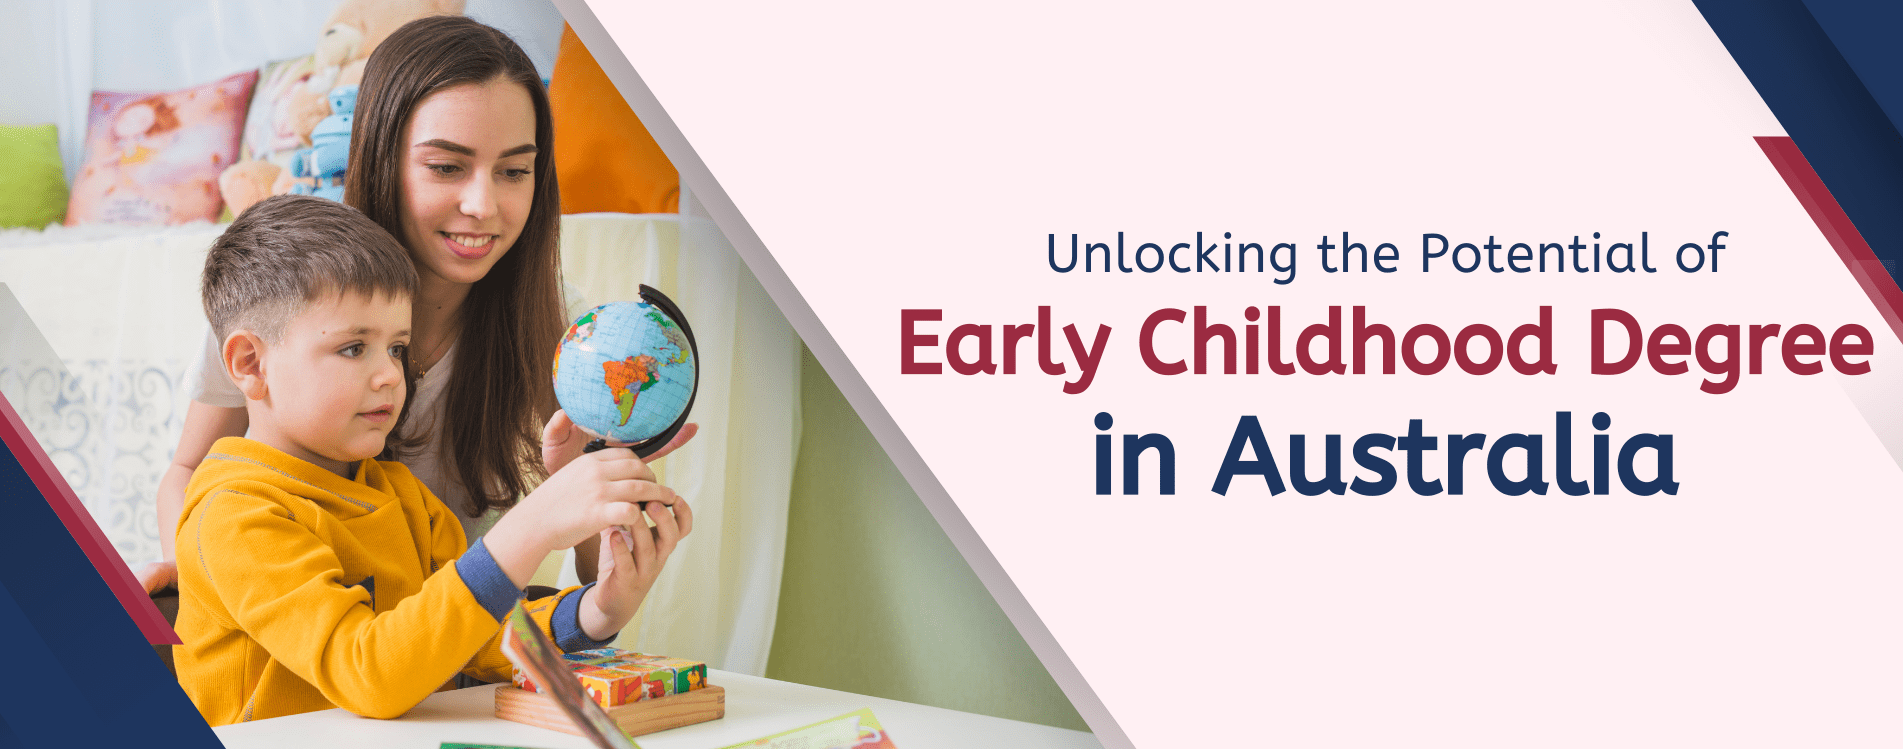 Unlocking the Potential of an Early Childhood Degree in Australia